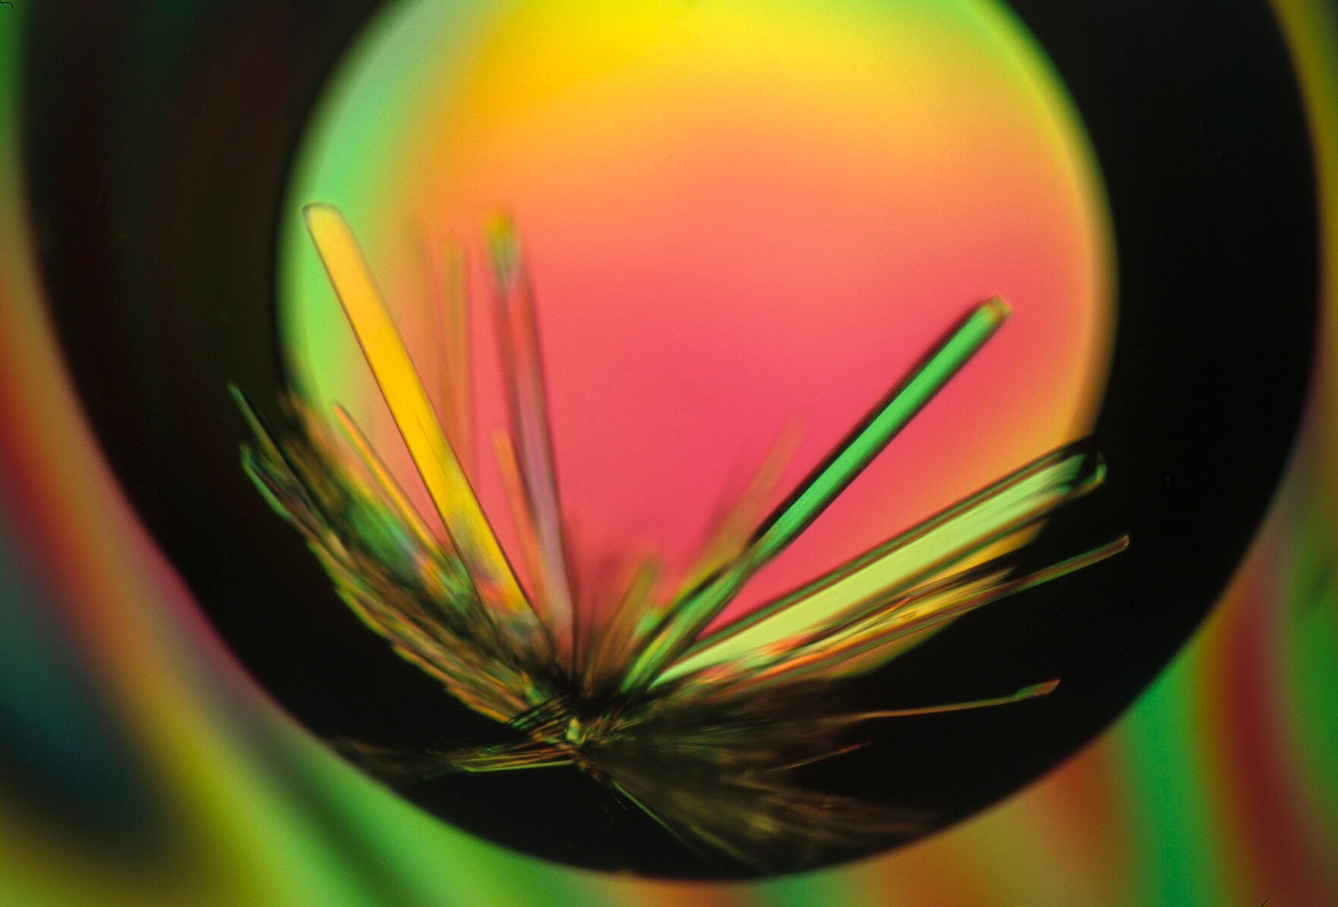 An image generated by a process called X-ray crystallography, the image shows a spiked crystalline formation which appears backlit with multicoloured light.